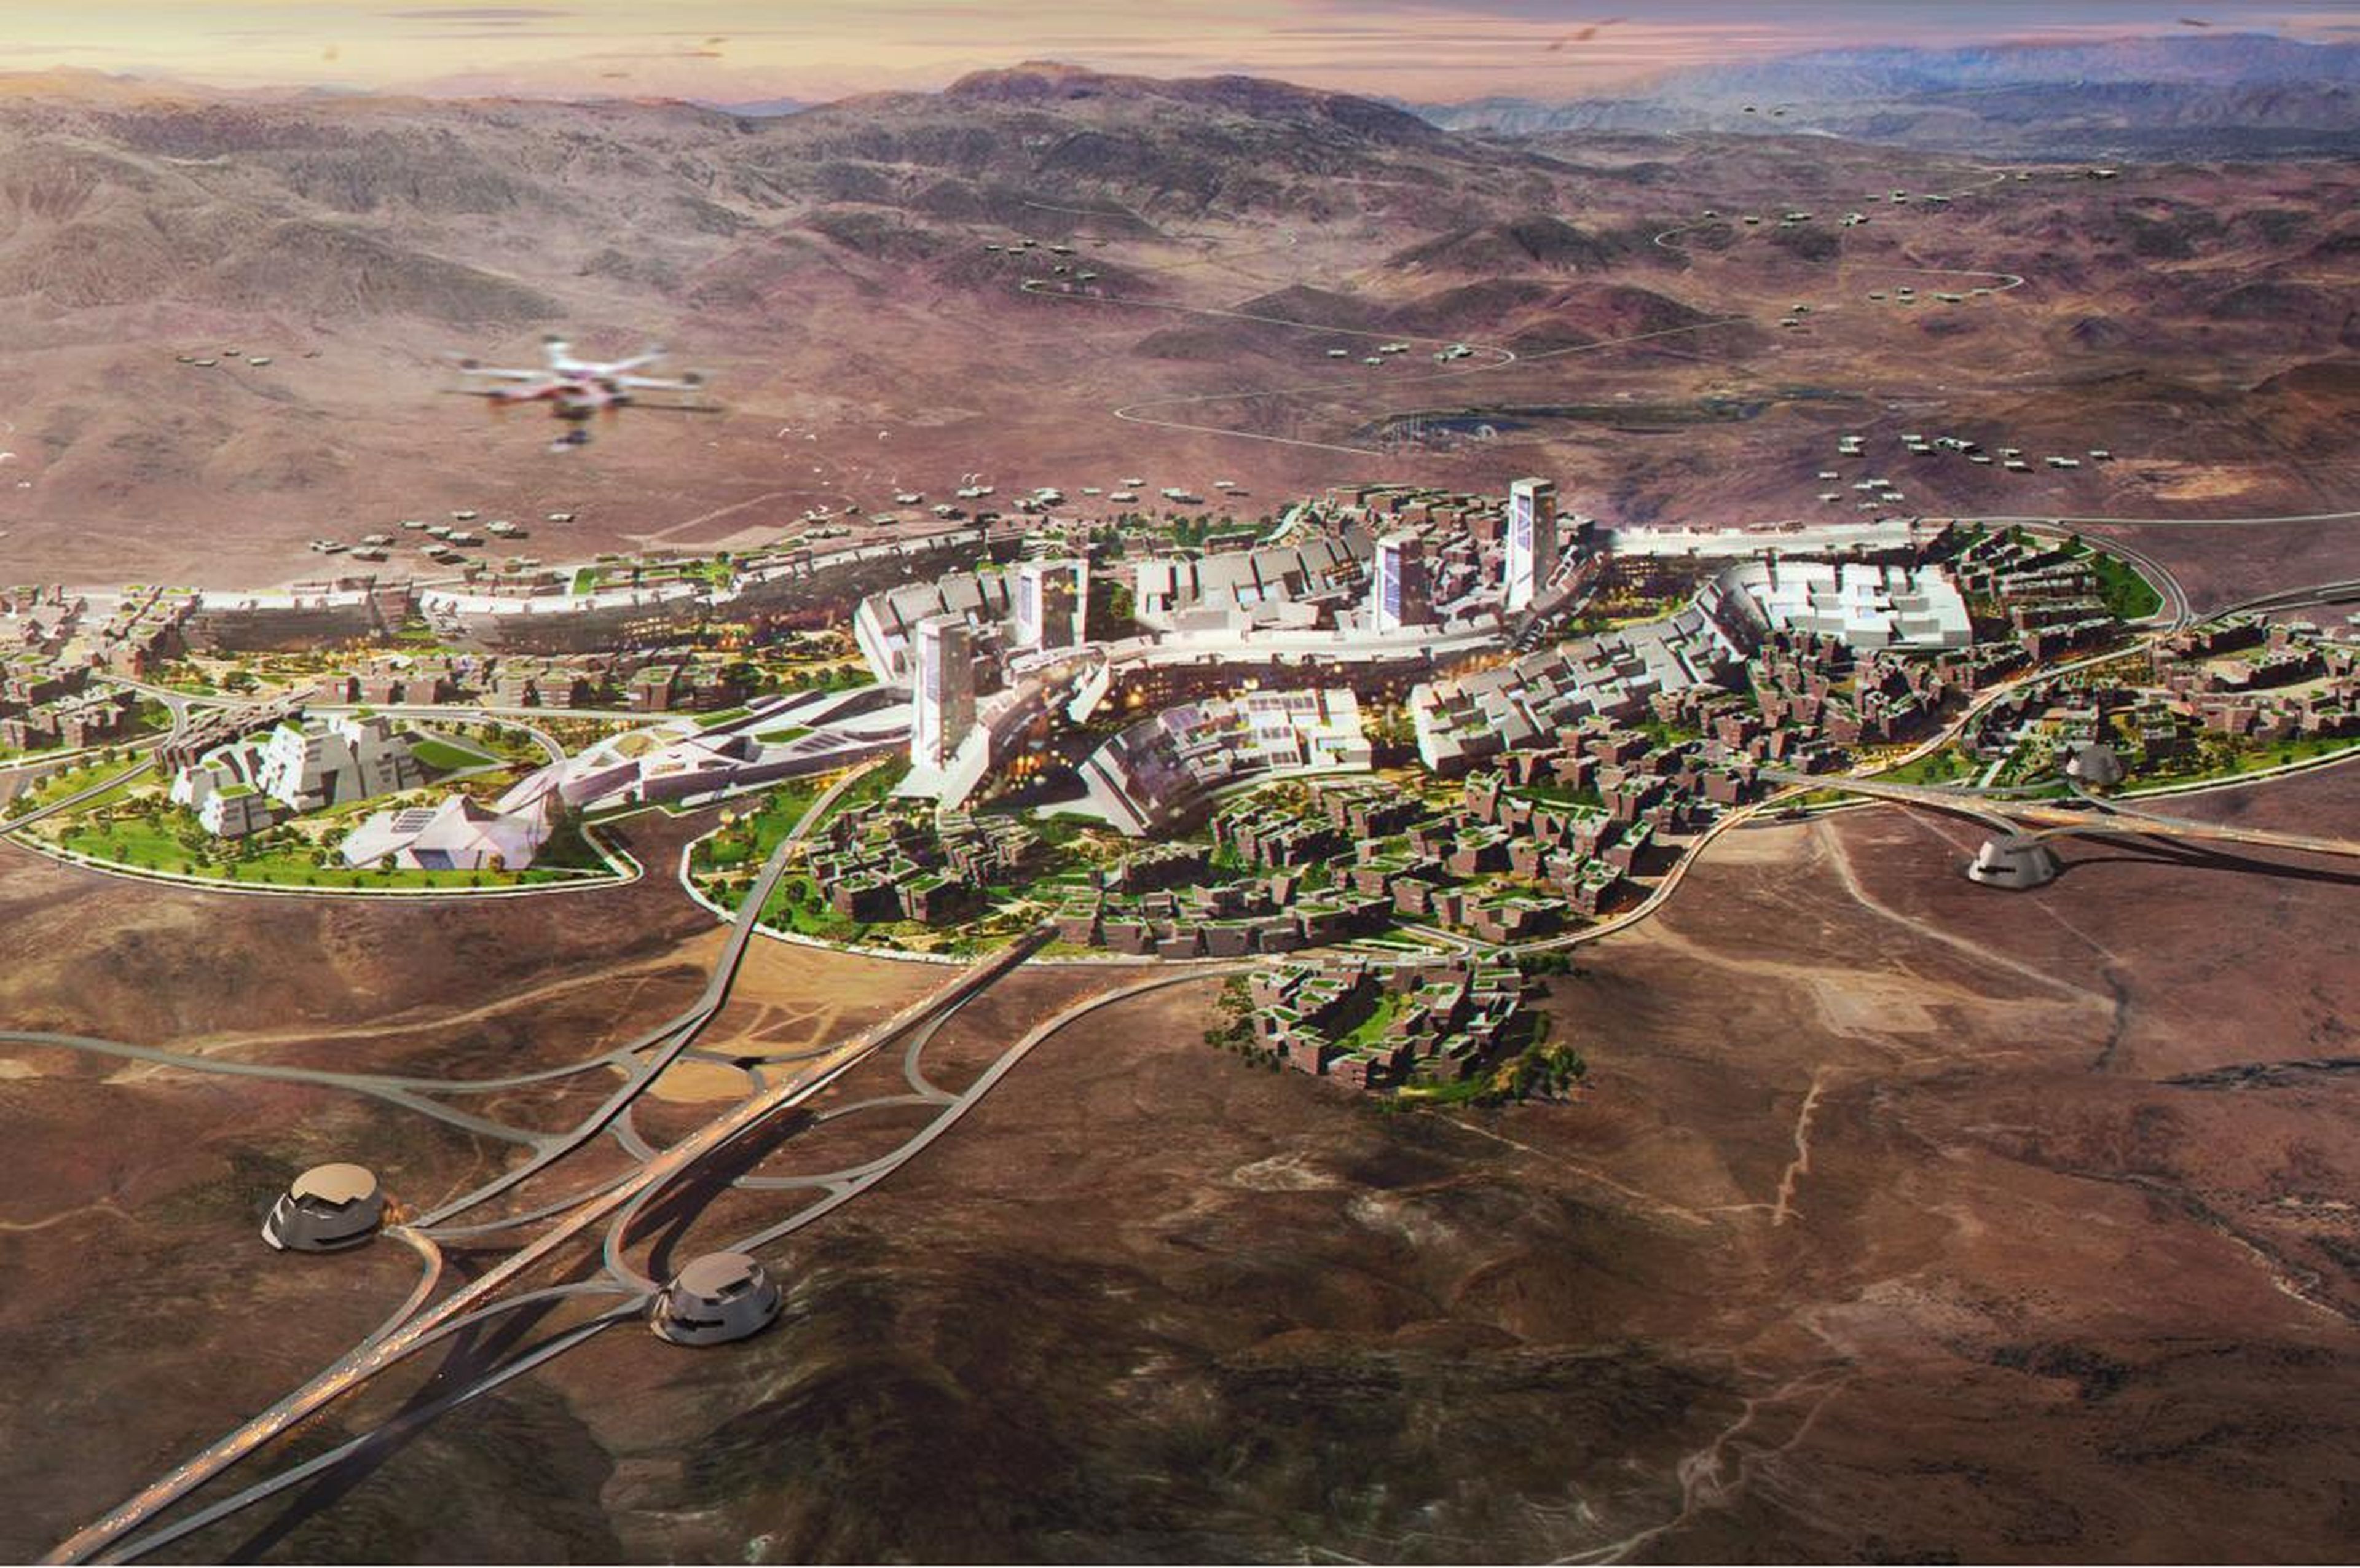 The other side of Innovation Park would be a residential "smart city" with homes and schools.